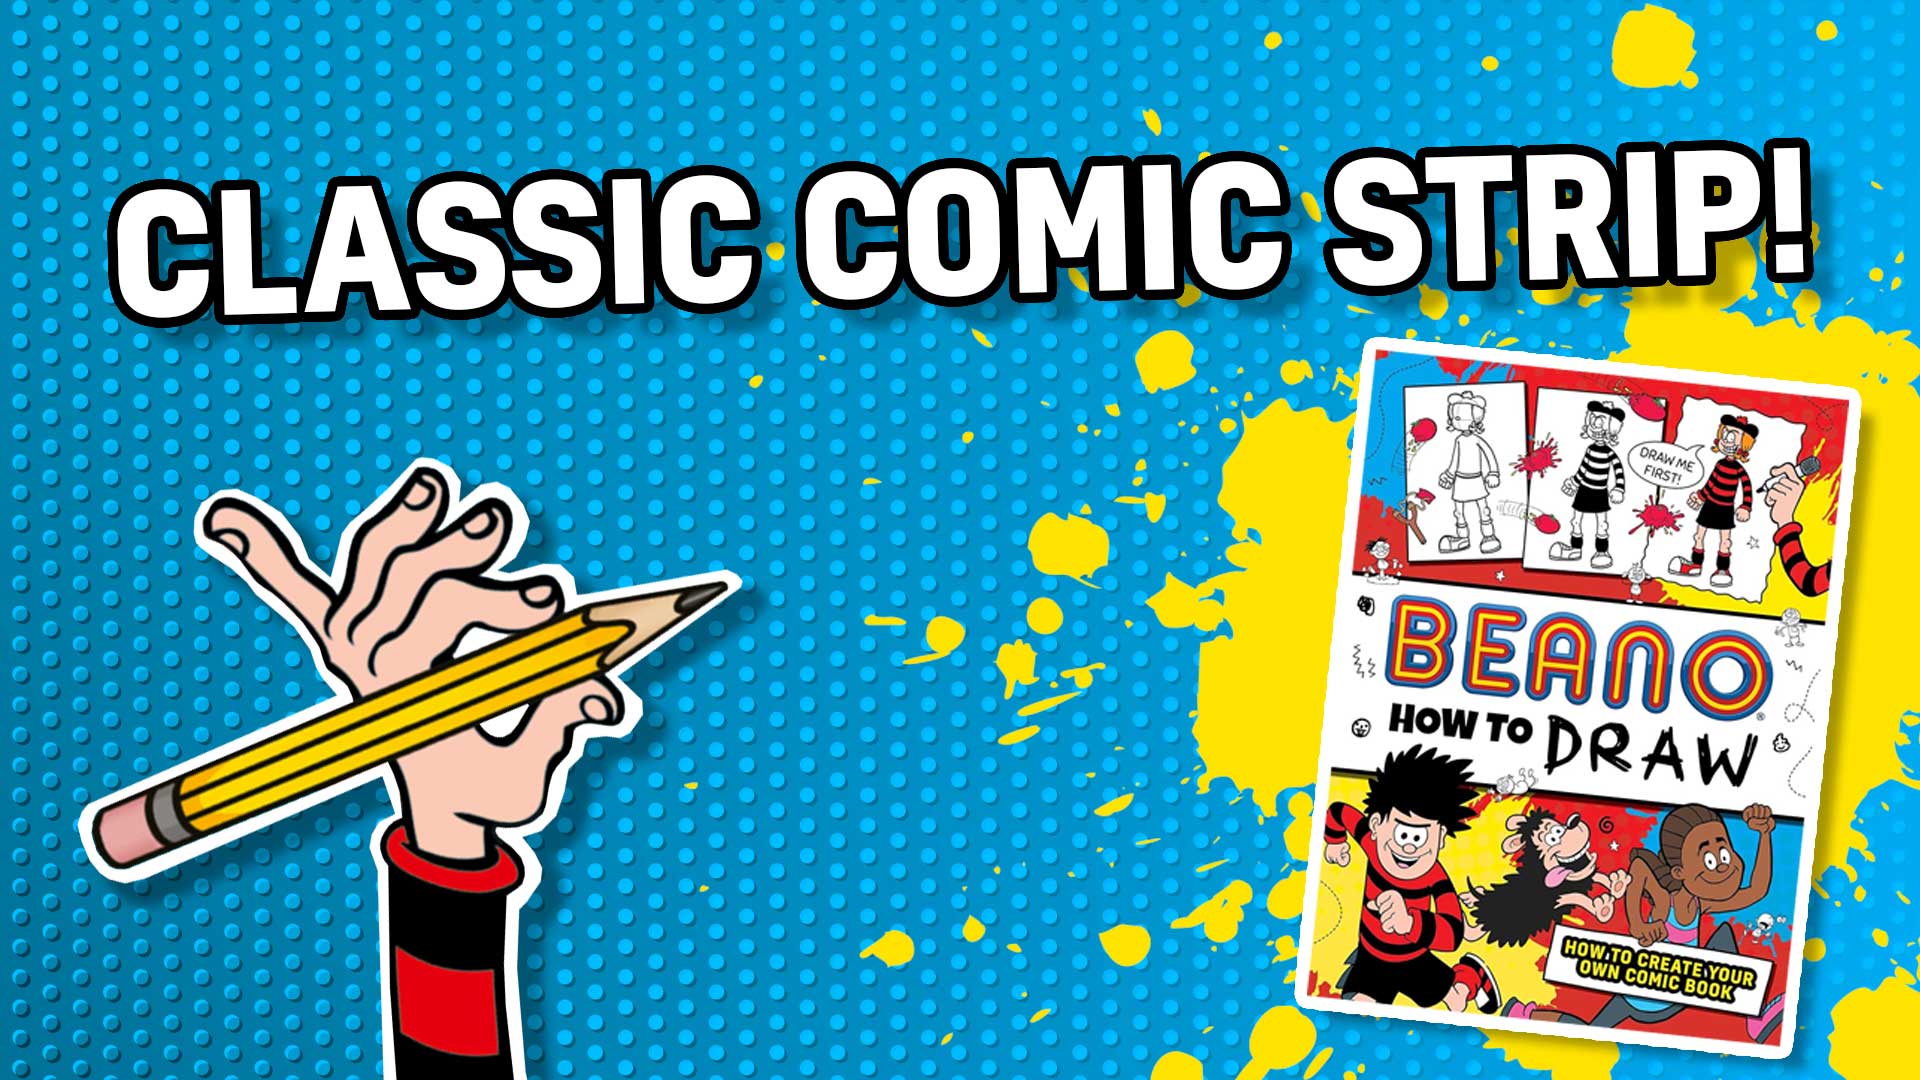 Result: Classic Comic Strip style